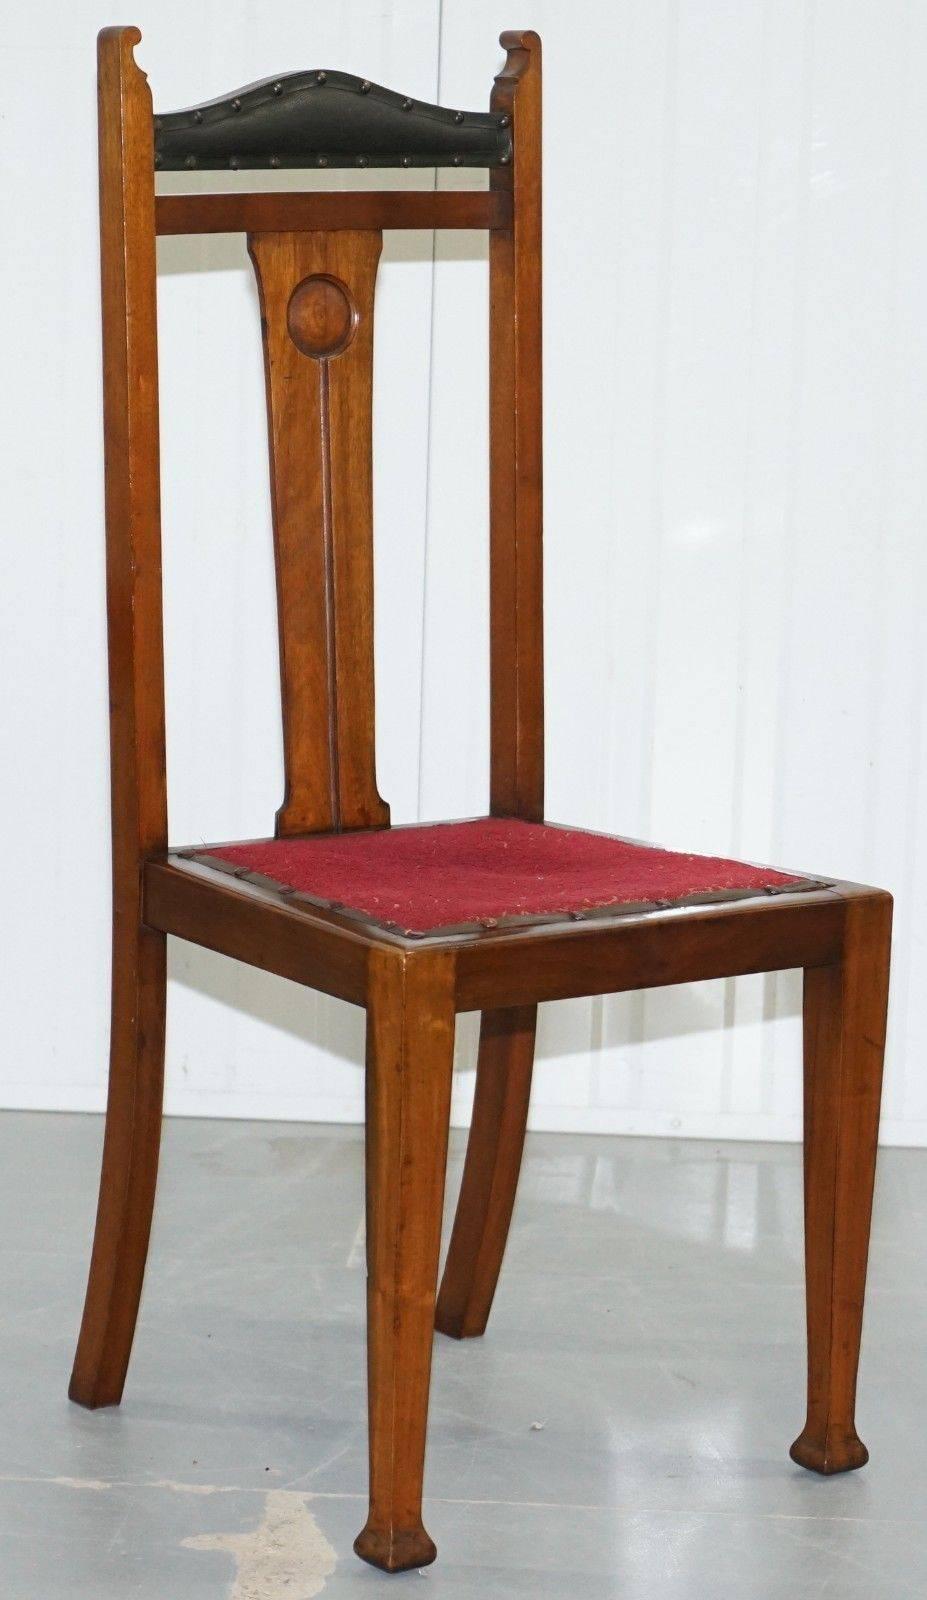 We are delighted to offer for sale this lovely set of four Liberty’s London Arts & Crafts Archibald knox style dining chairs

A very good looking and well made set, they just scream arts and crafts class, look at the clean lines of the legs, no